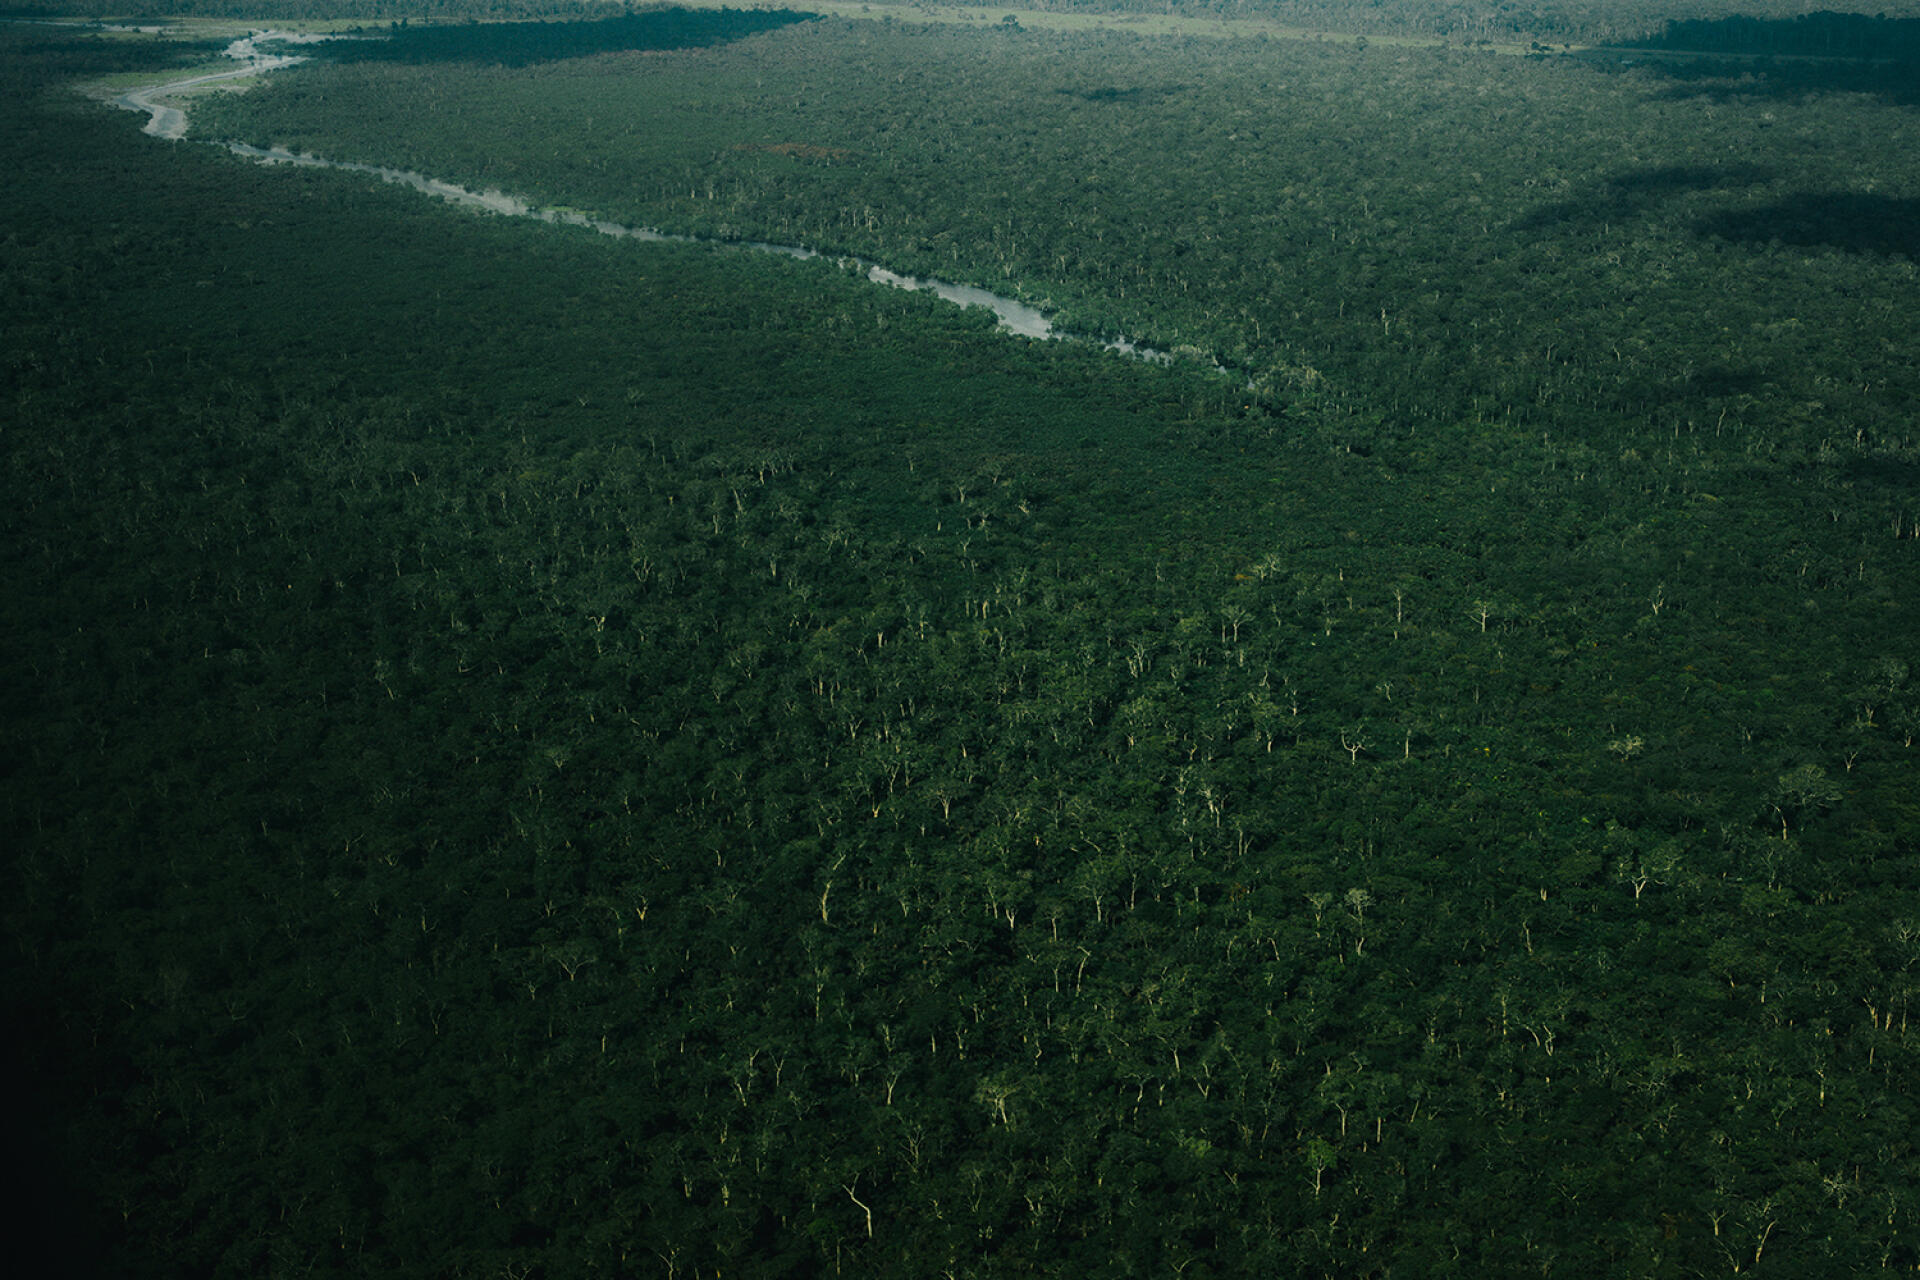 The forest in Equateur Province, near the town of Mbandaka, Democratic Republic of Congo. All photos were taken in October 2021.